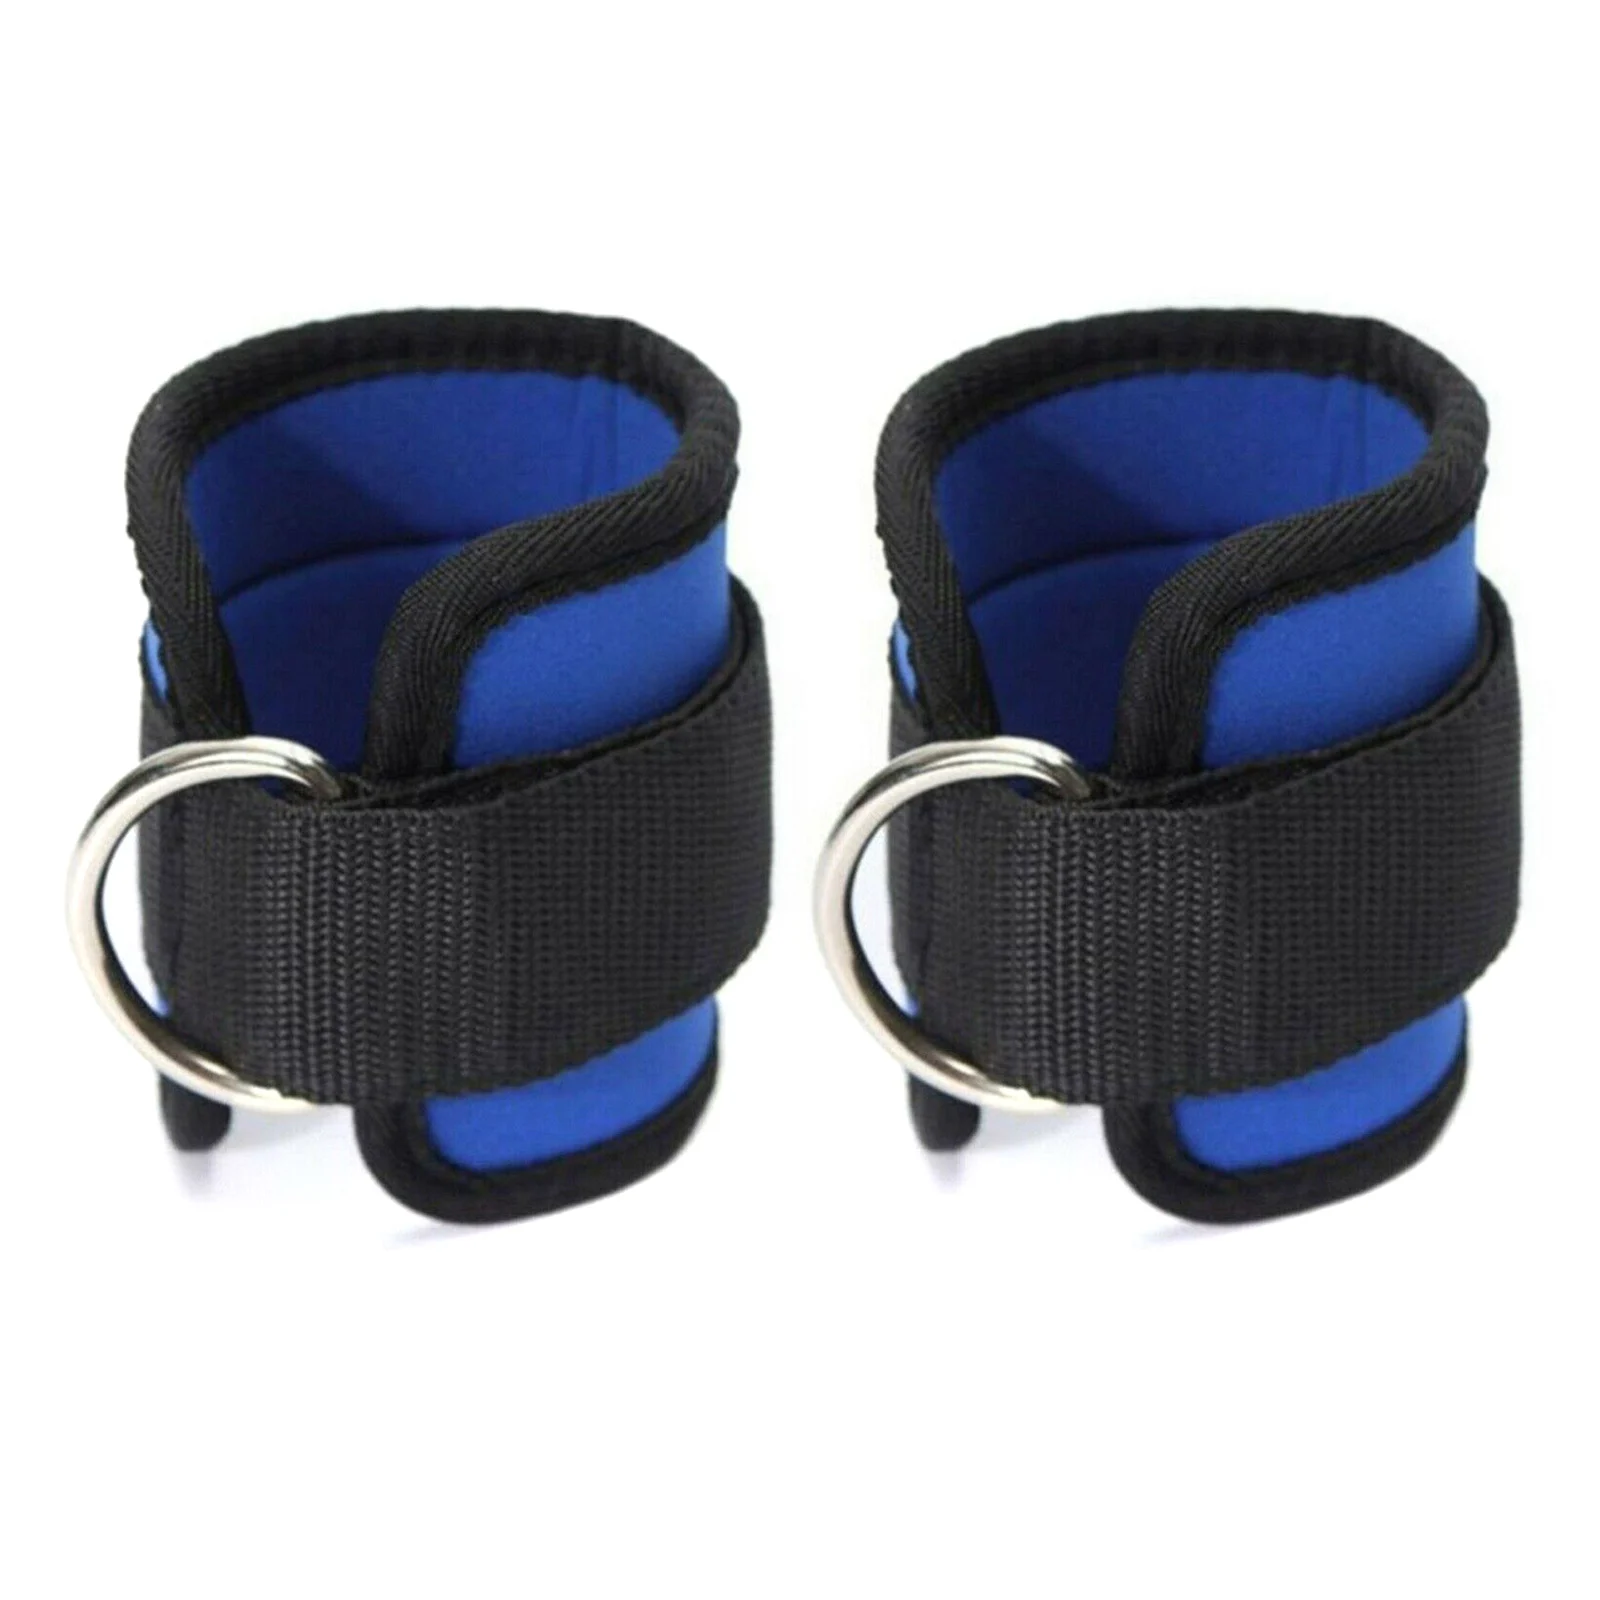 

2pcs Ankle Weights Adjustable Leg Wrist Strap Running Boxing Braclets Straps Gym Accessory